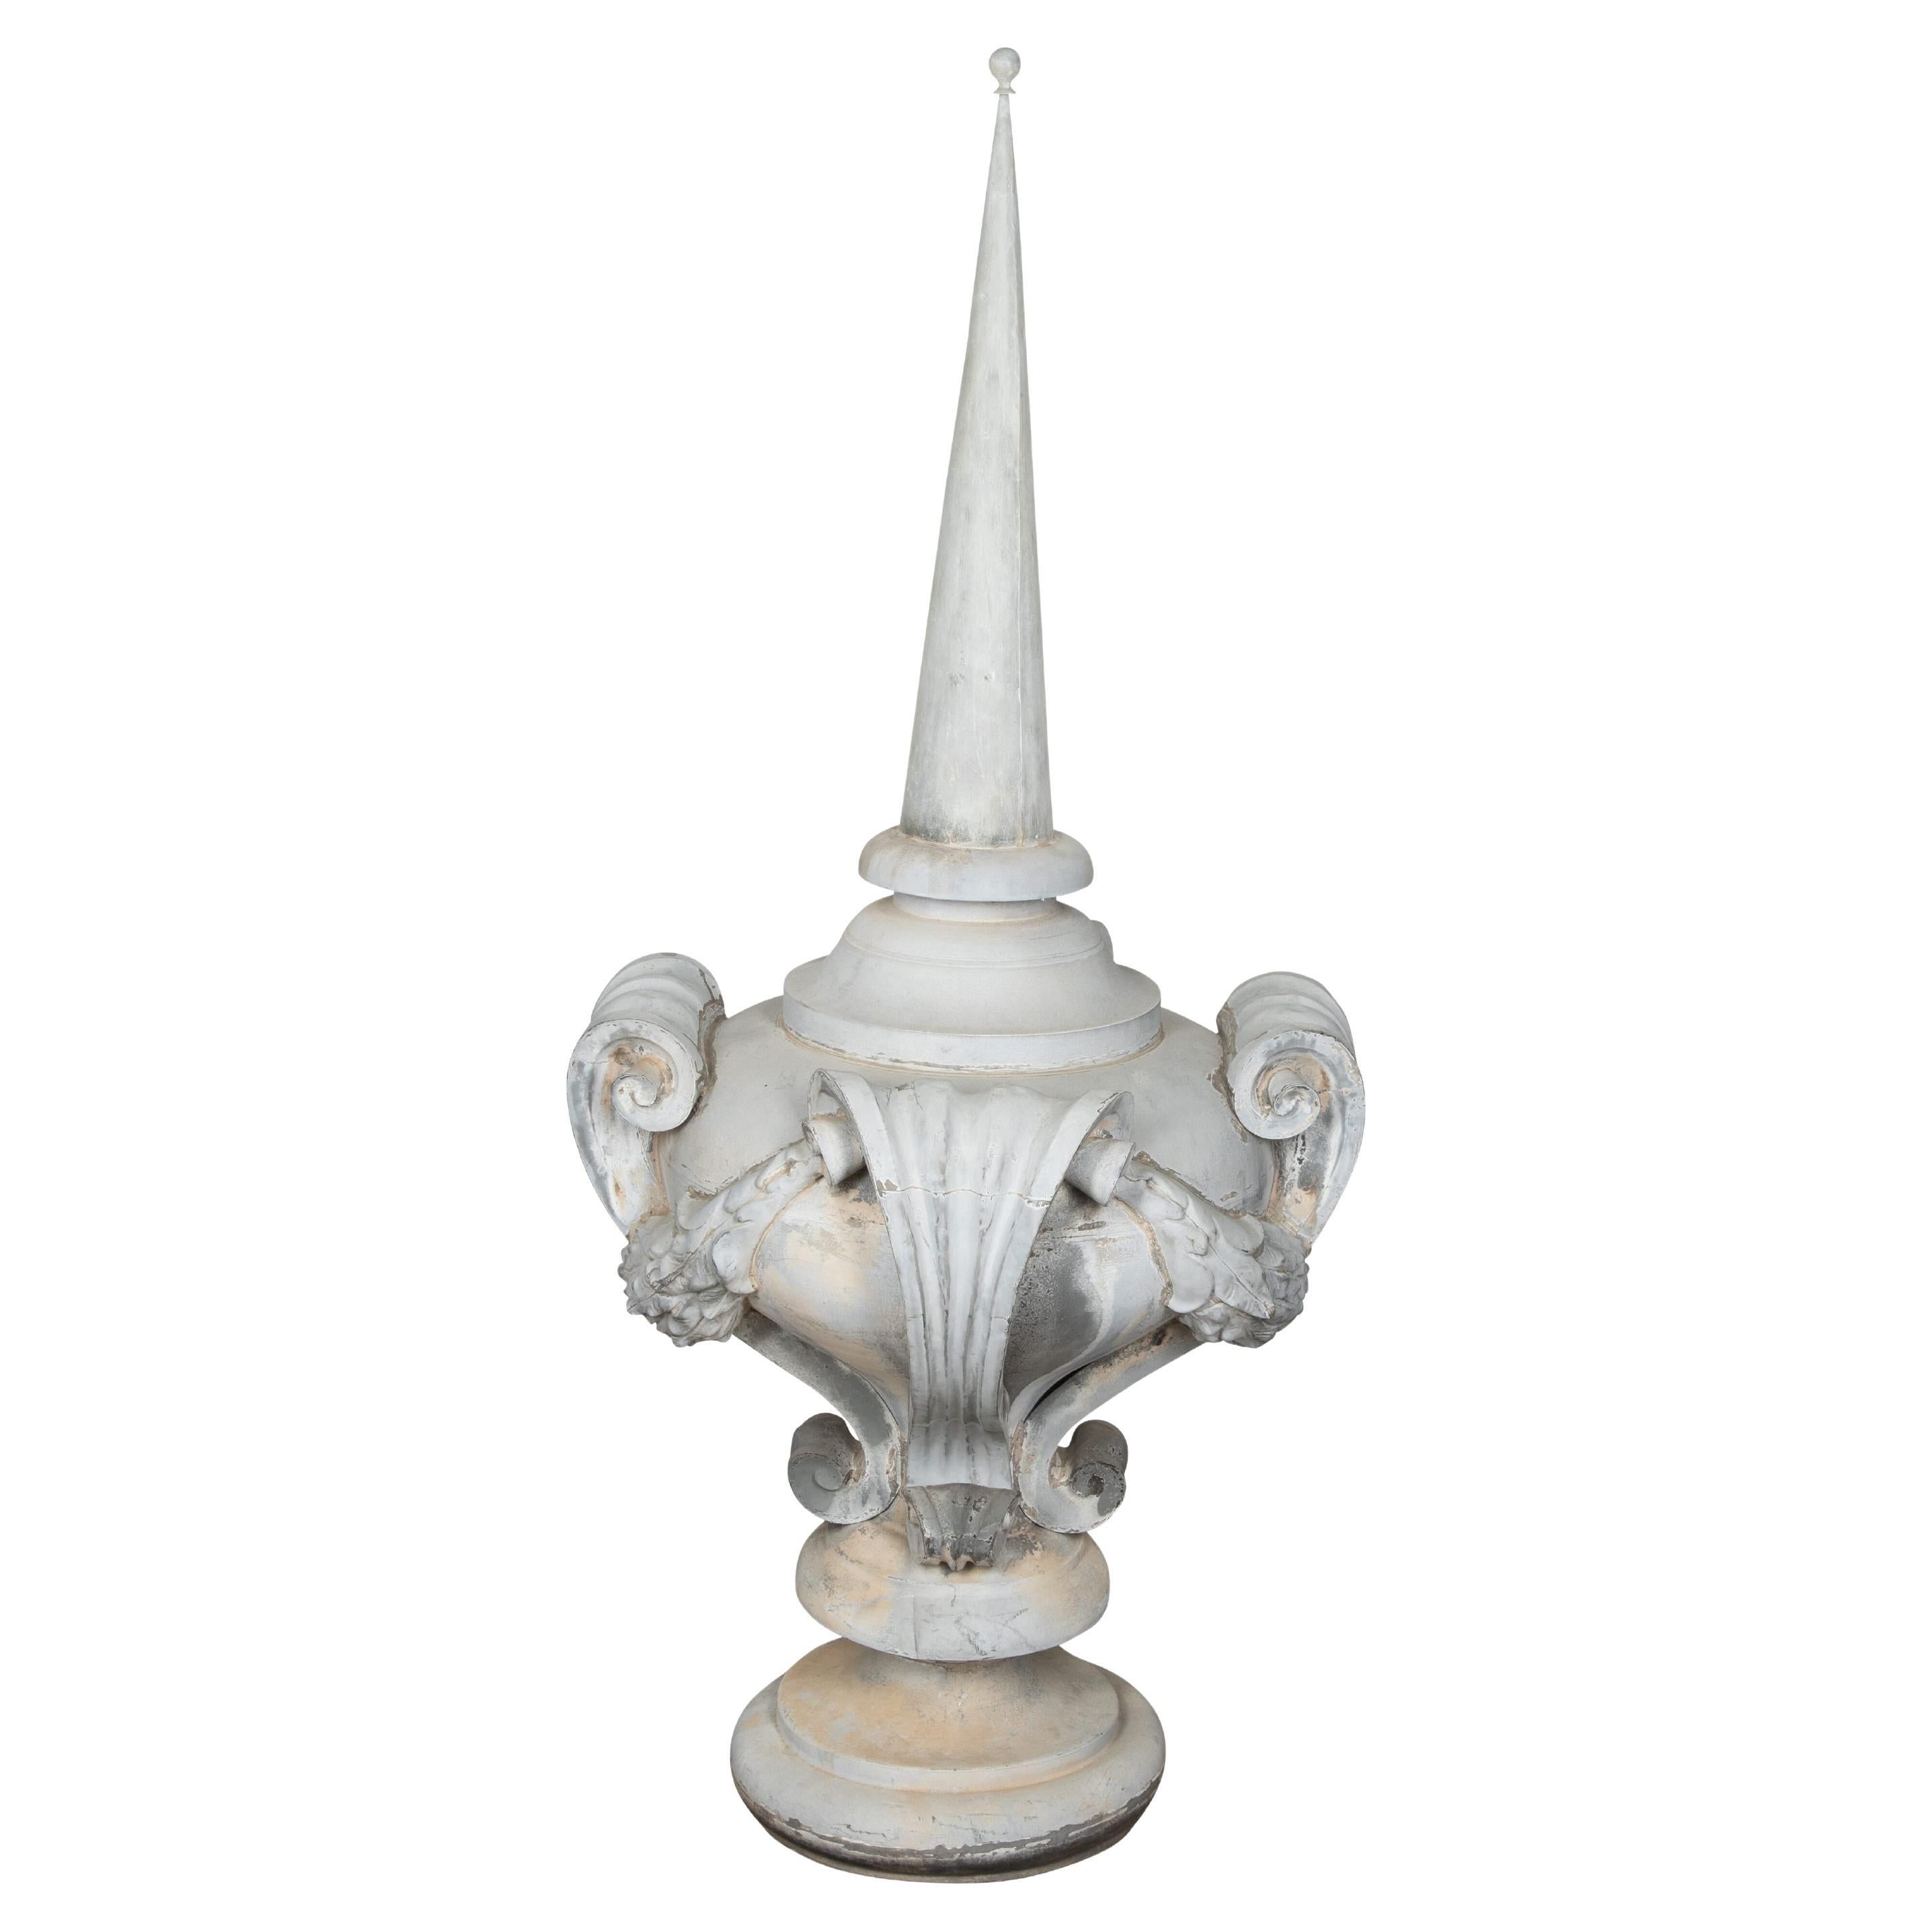 Large 19th Century French Zinc Finial